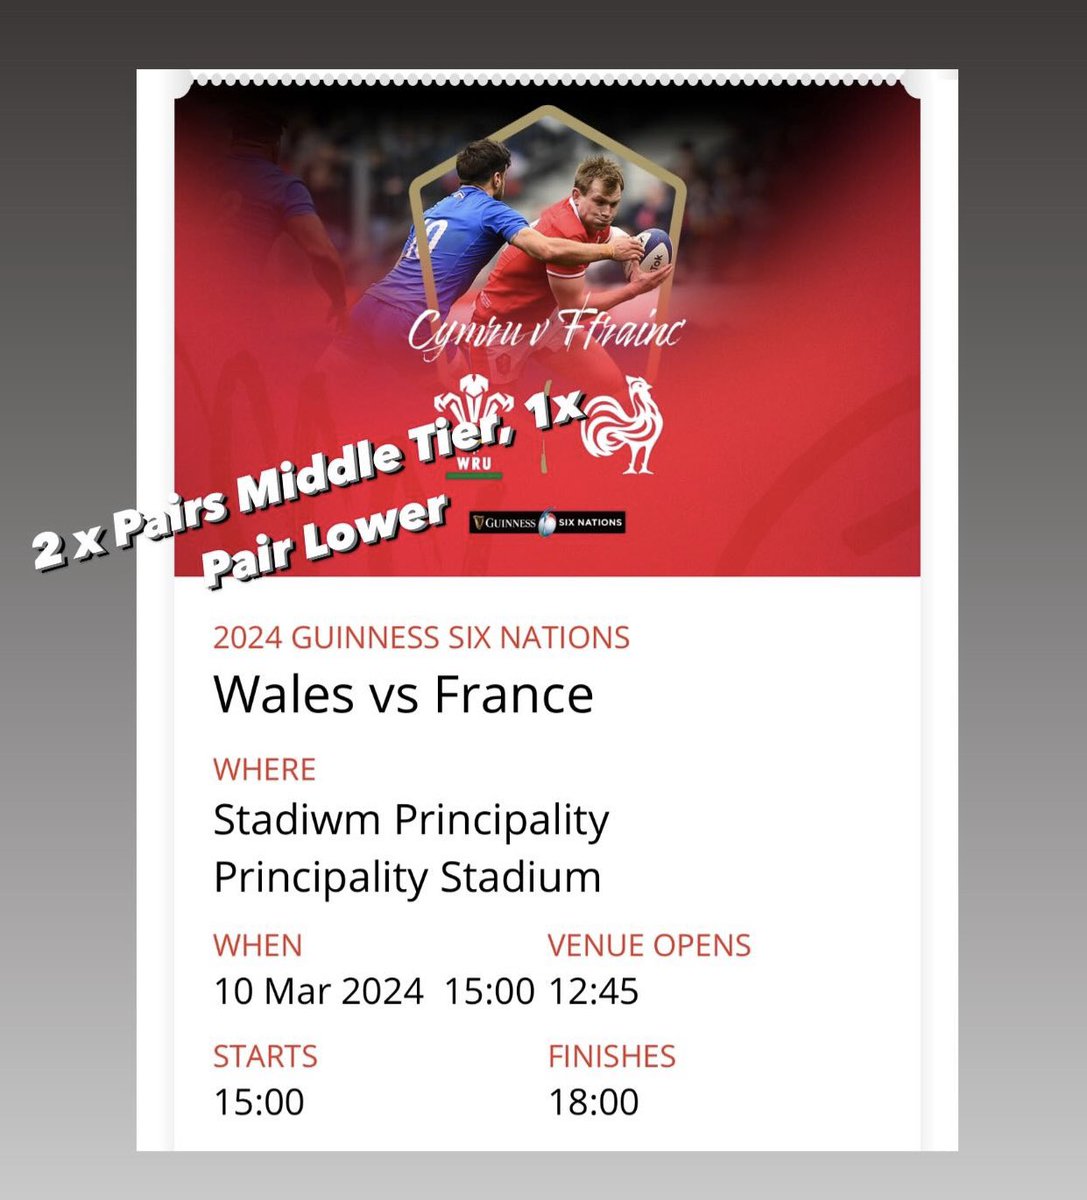 3 x Pairs of Wales v France tickets for sale. 2 x pairs Middle tier and 1 x pair Lower tier. Tickets are £115 and £105 each face value but I’m happy to sell for £100 each. DM for details 👍👍